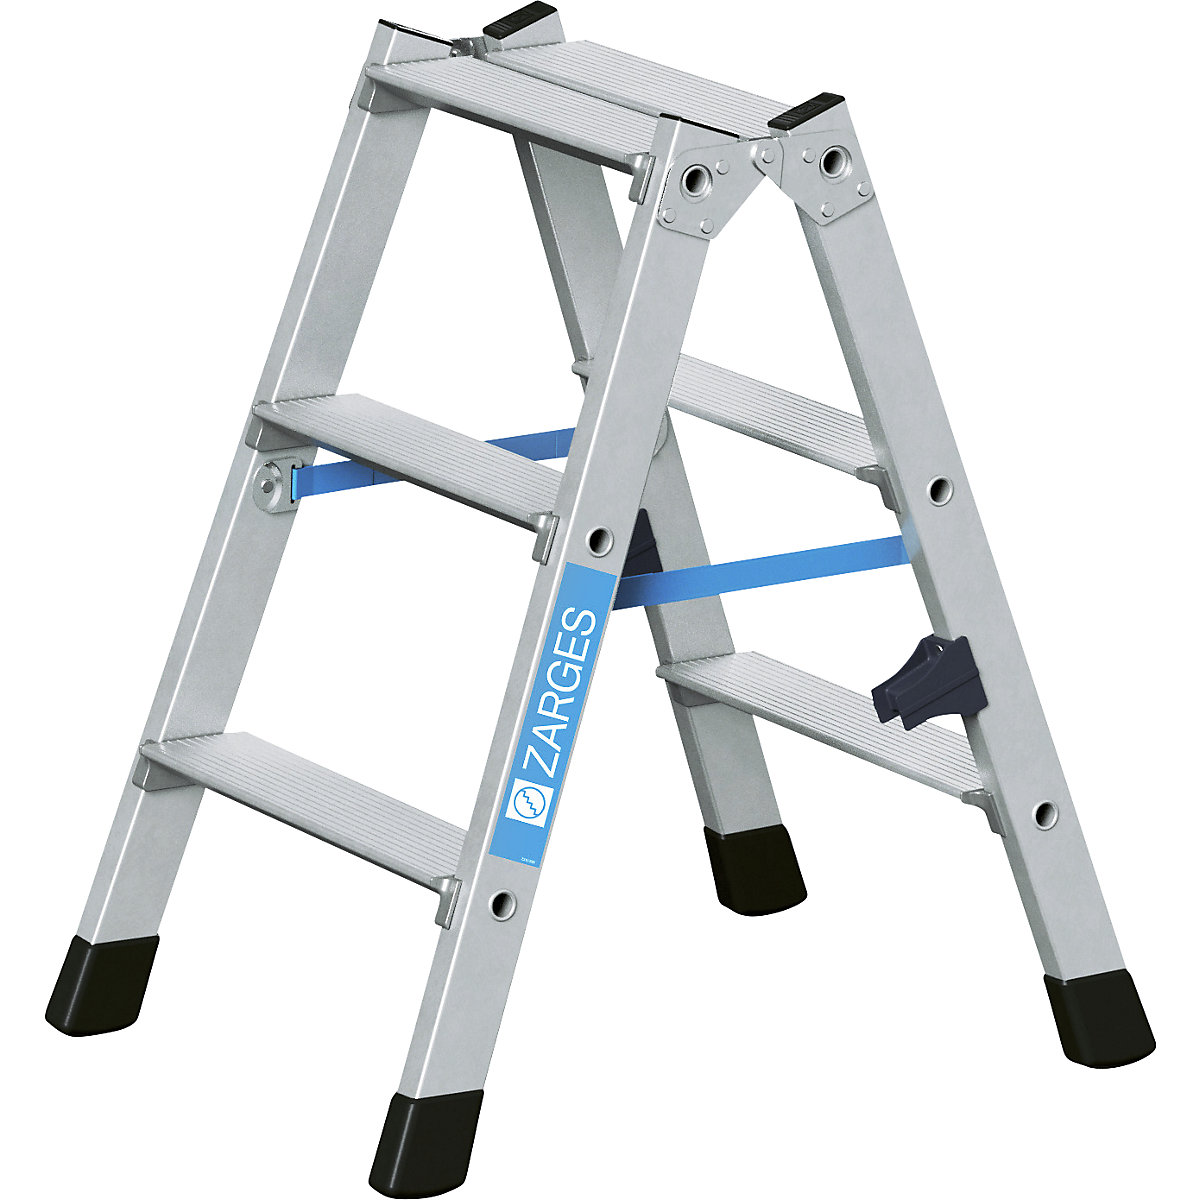 Aluminium step ladder, double sided access - ZARGES